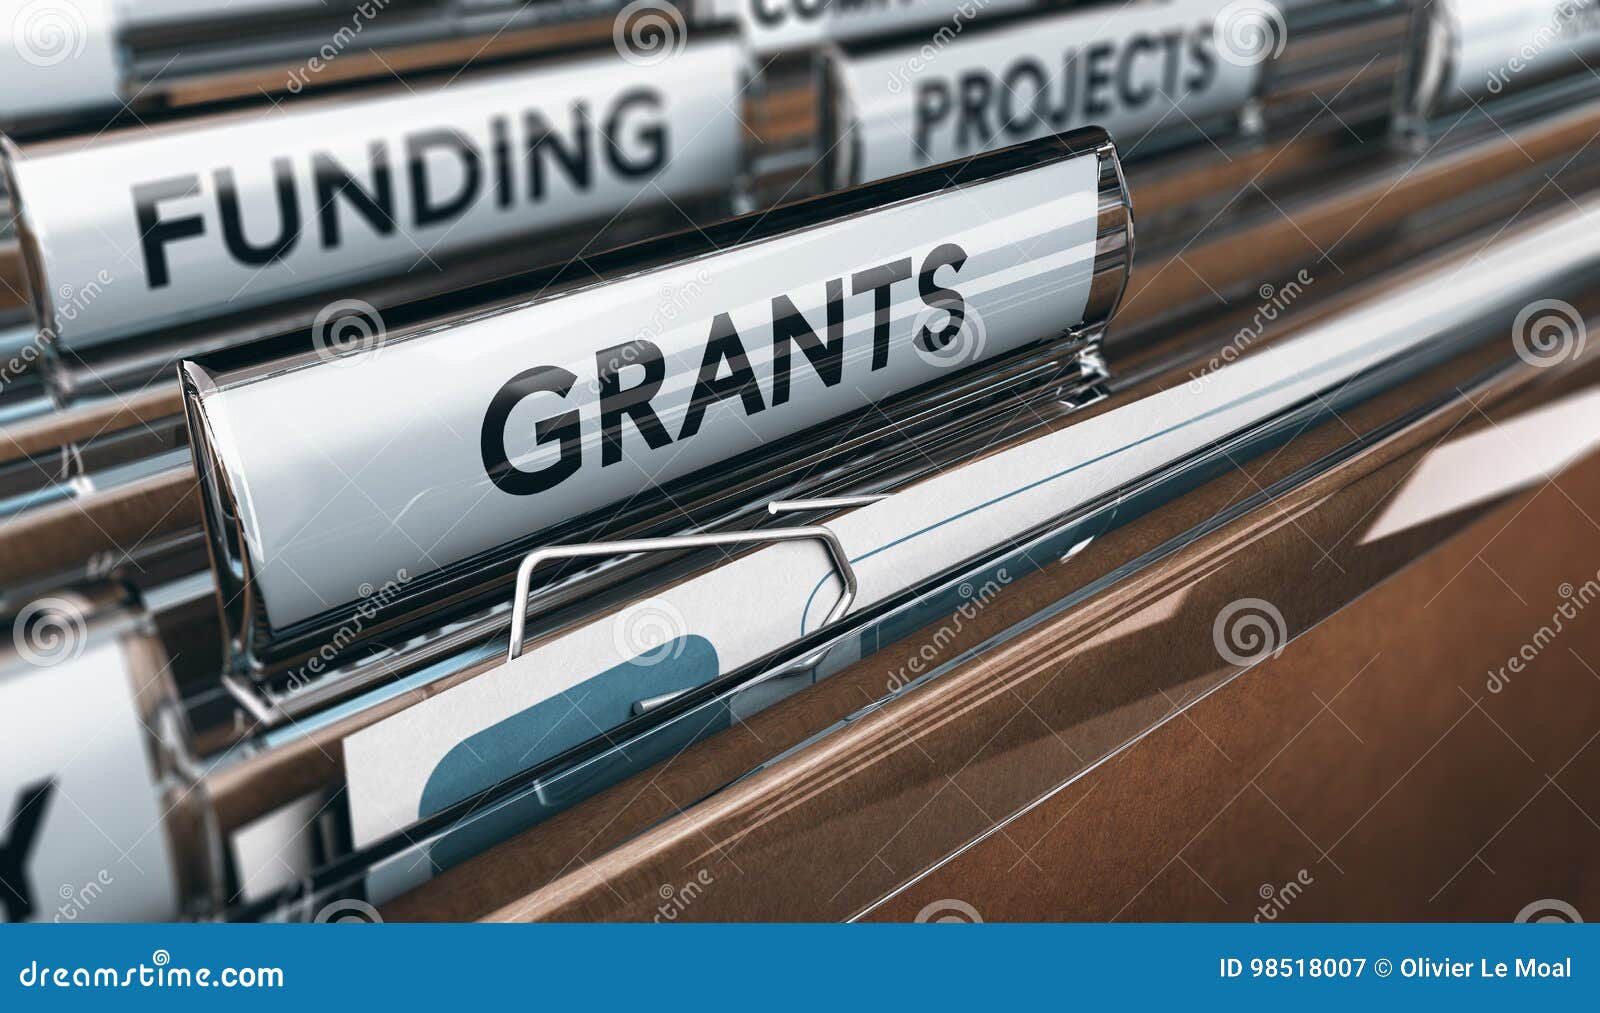 seeking grants for an association, a small business or for research